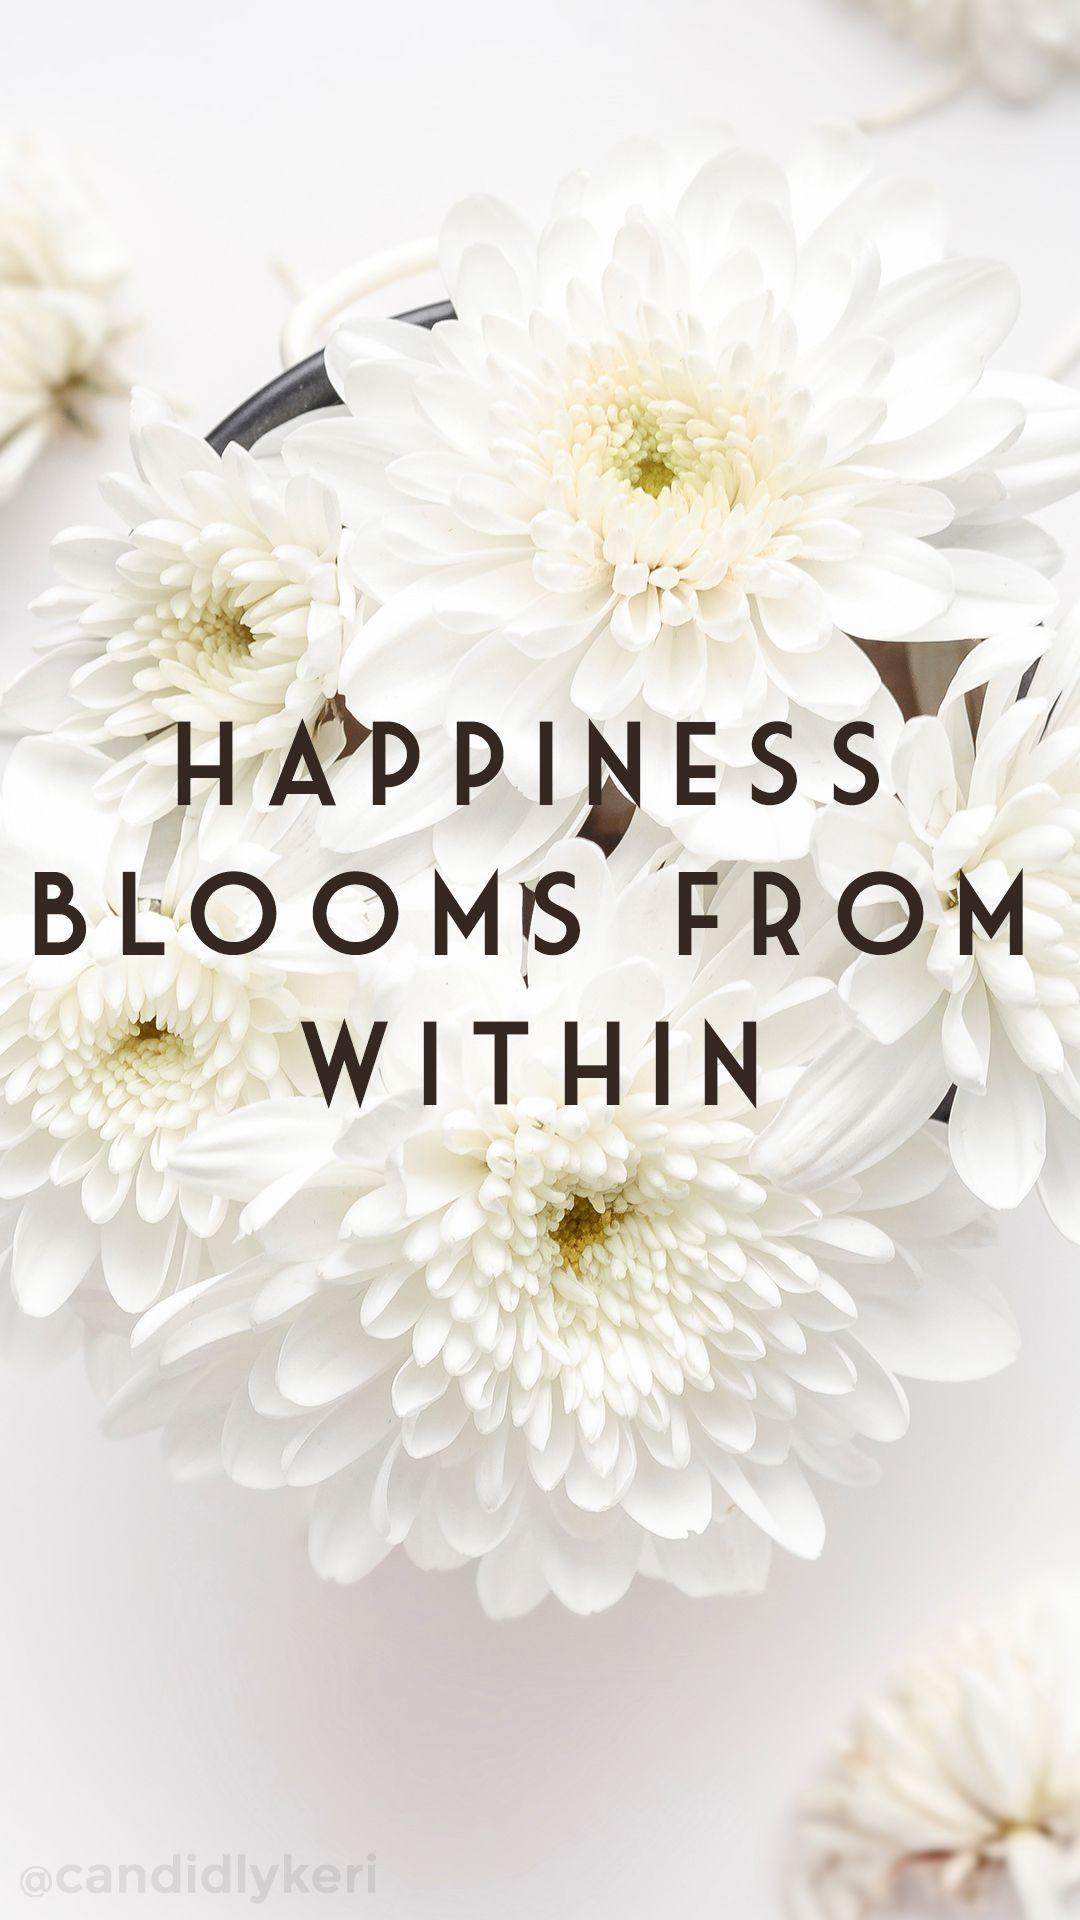 Flower Quote iPhone Wallpaper Free Flower Quote iPhone Background